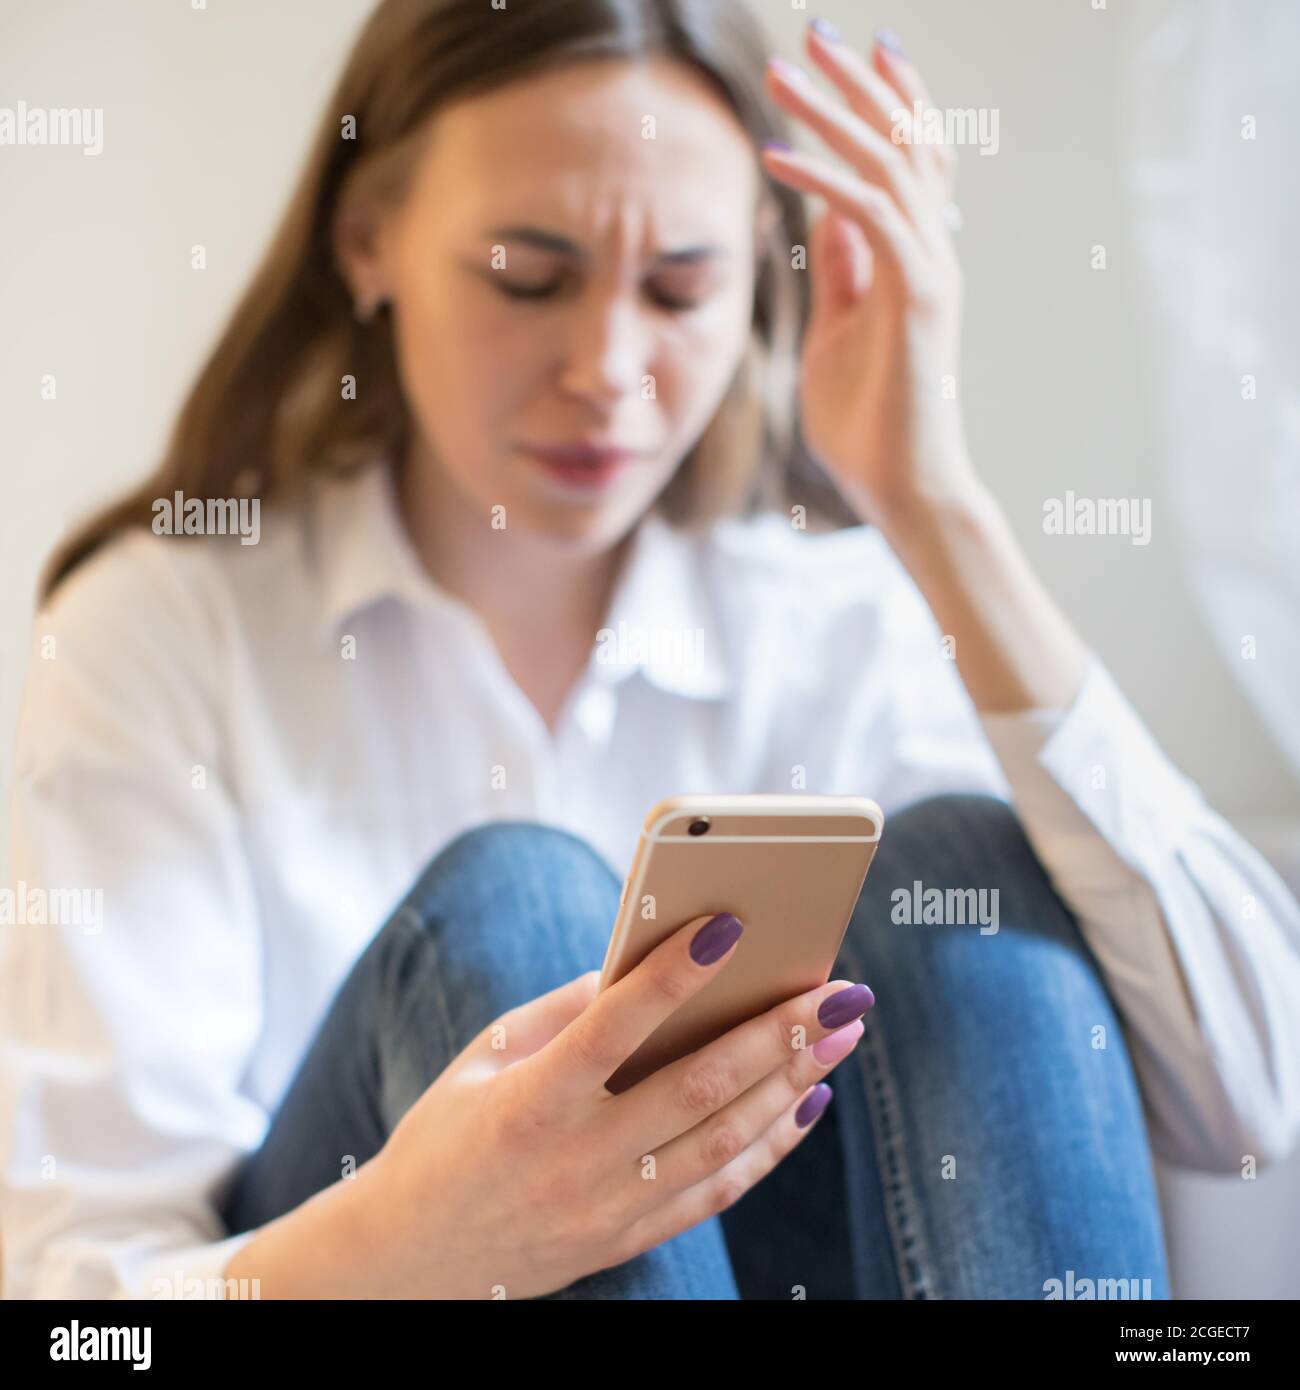 Crying woman in depression looking at phone gets bad news, sitting, focus on smartphone. Stock Photo